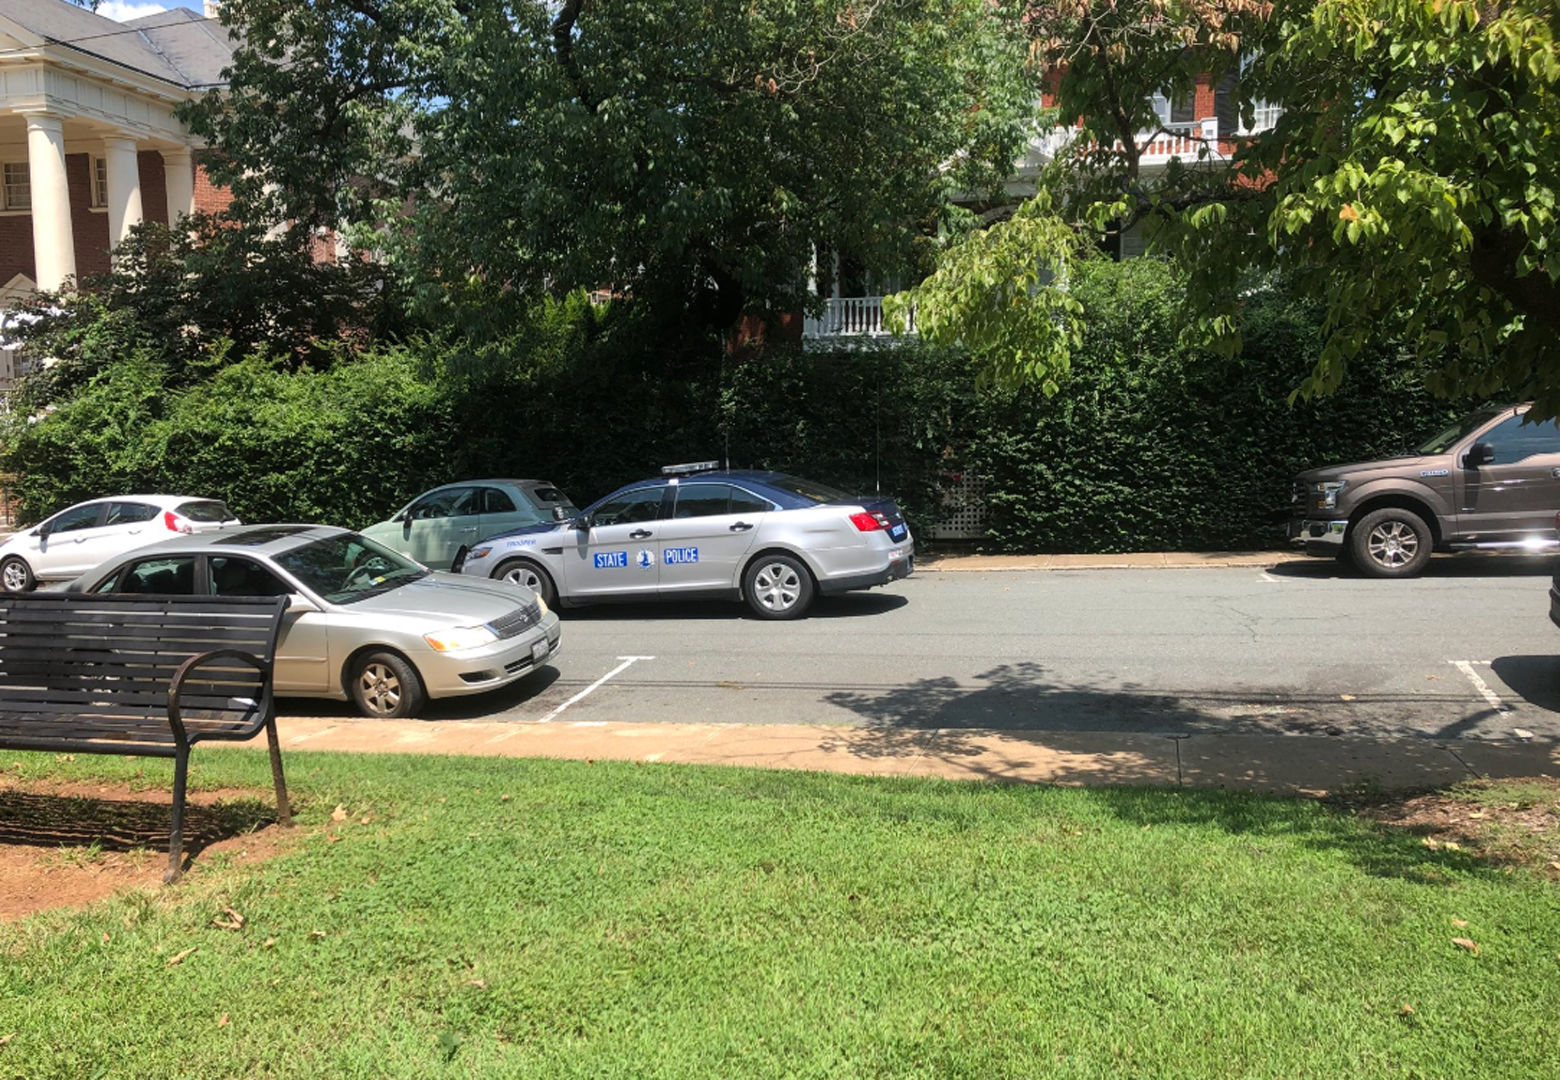 There is a heavy police presence in Charlottesville. (WTOP/Max Smith)